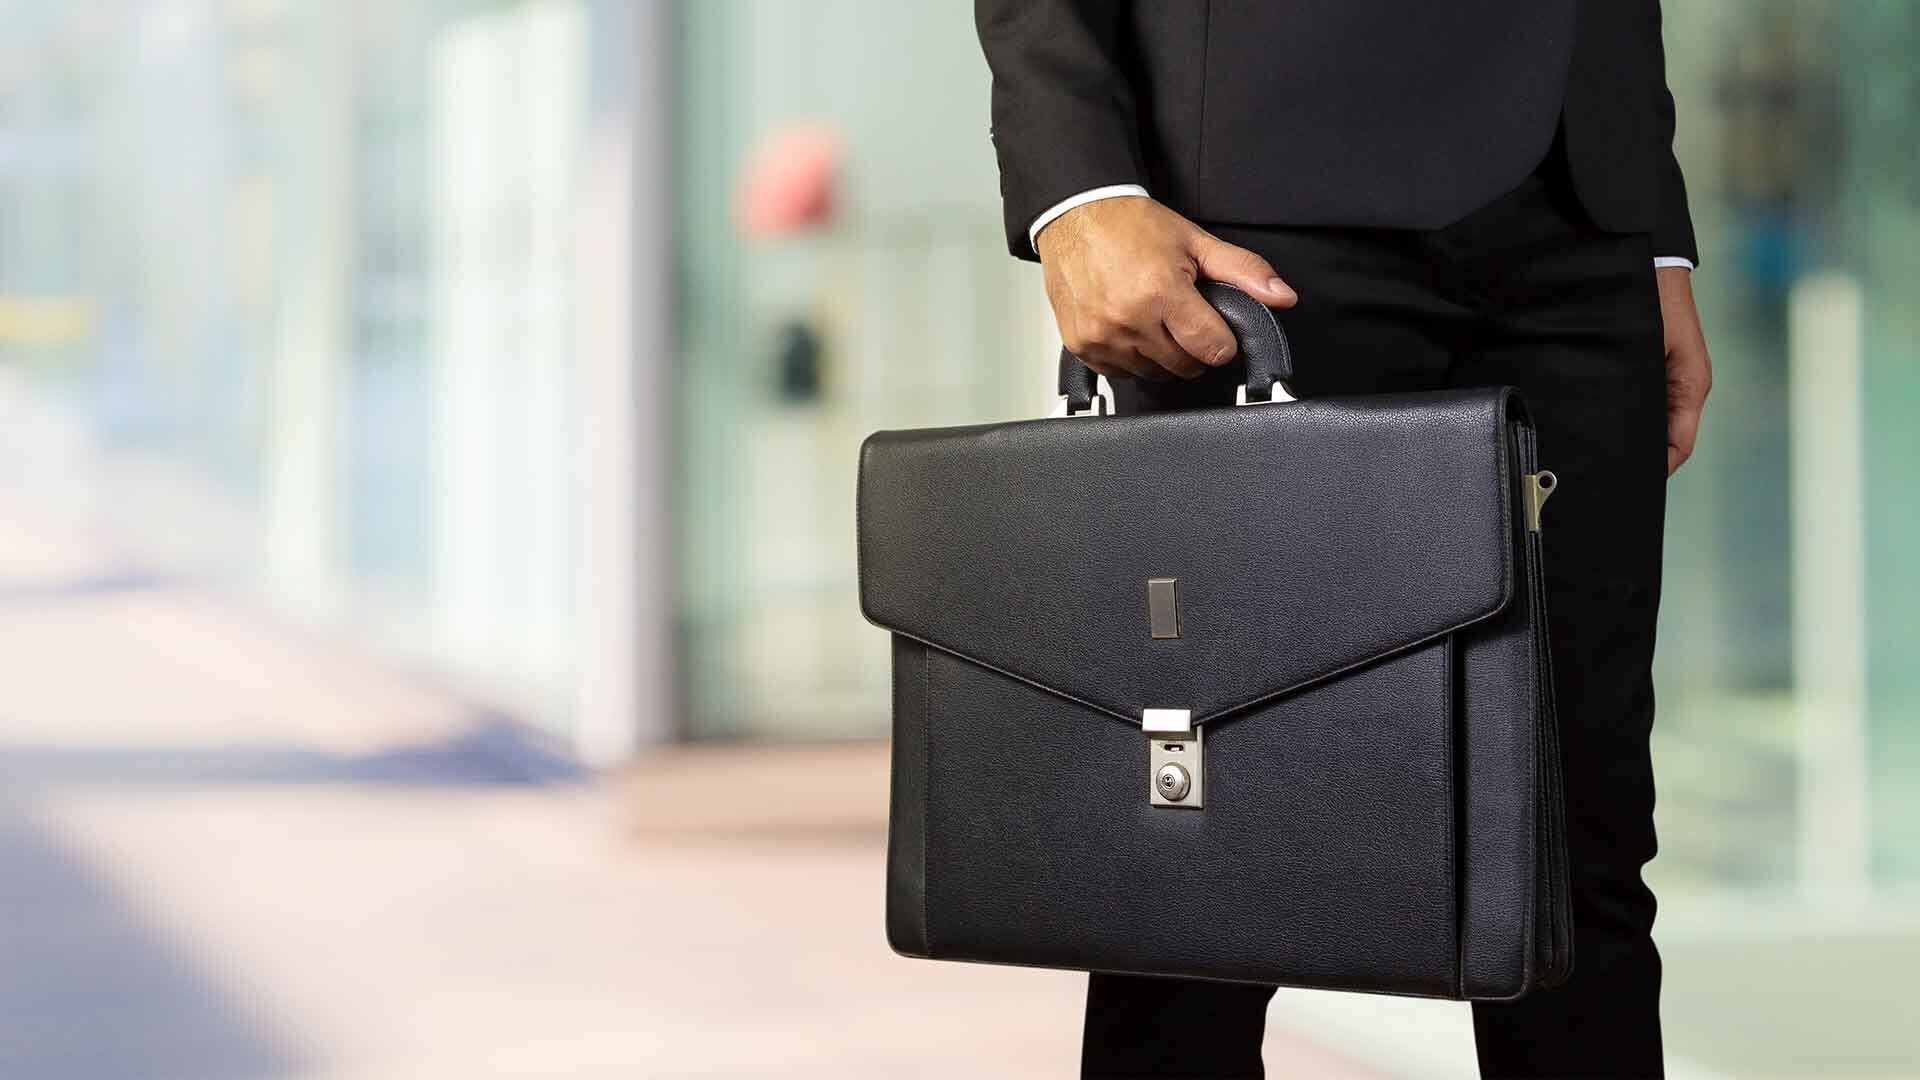 Man carrying a briefcase